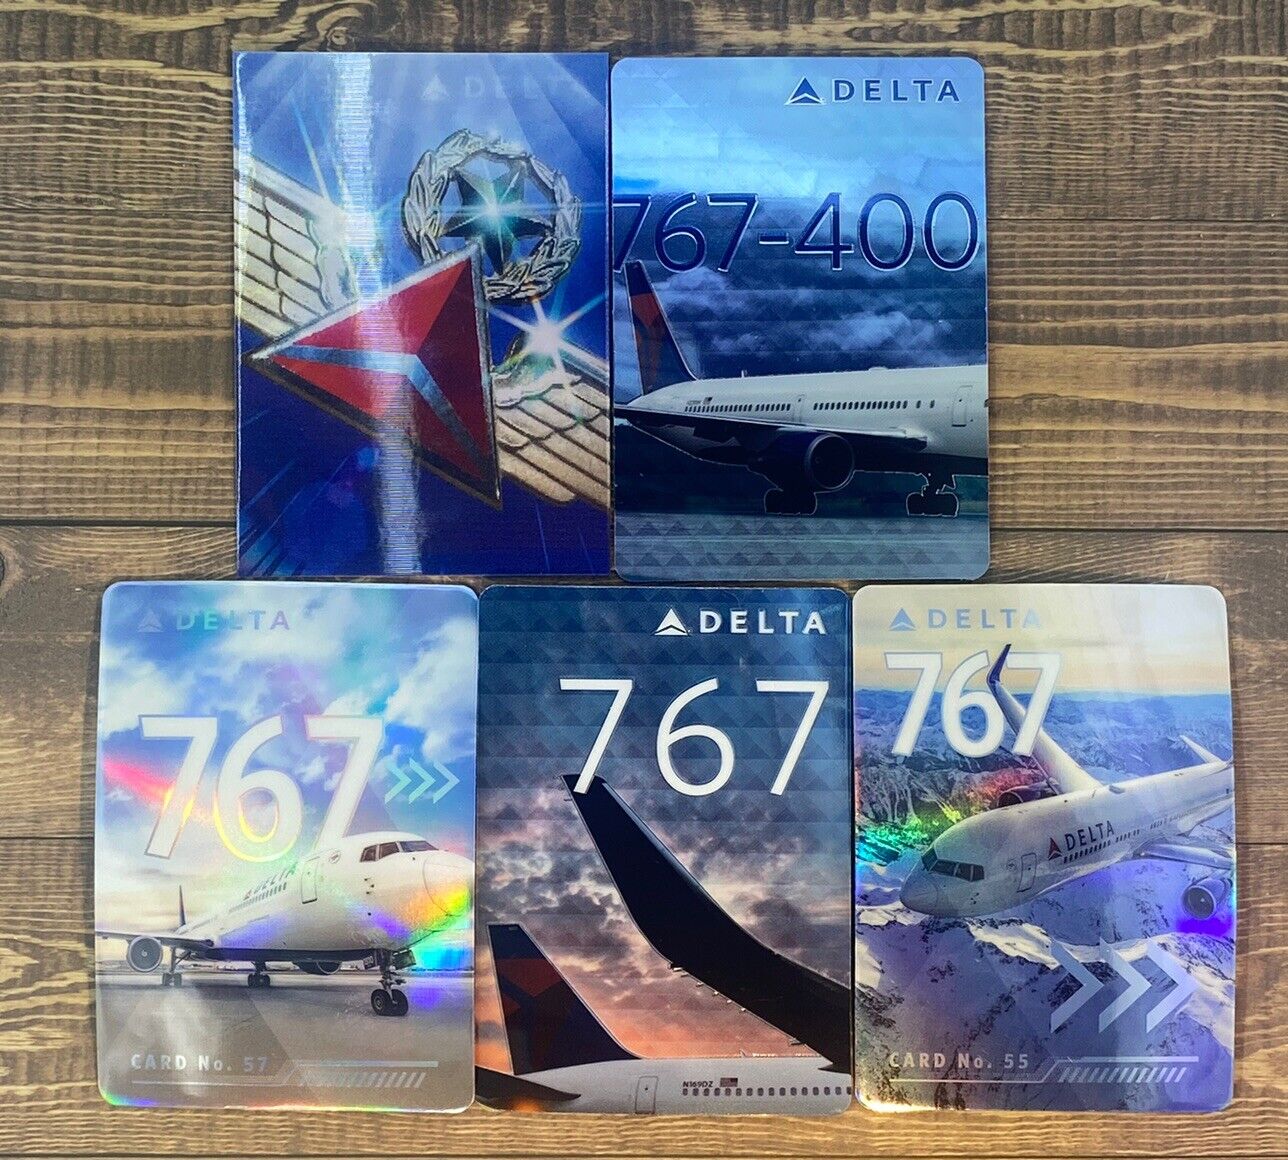 2015 Delta Airlines Boeing Model 767 Trading Card Lot